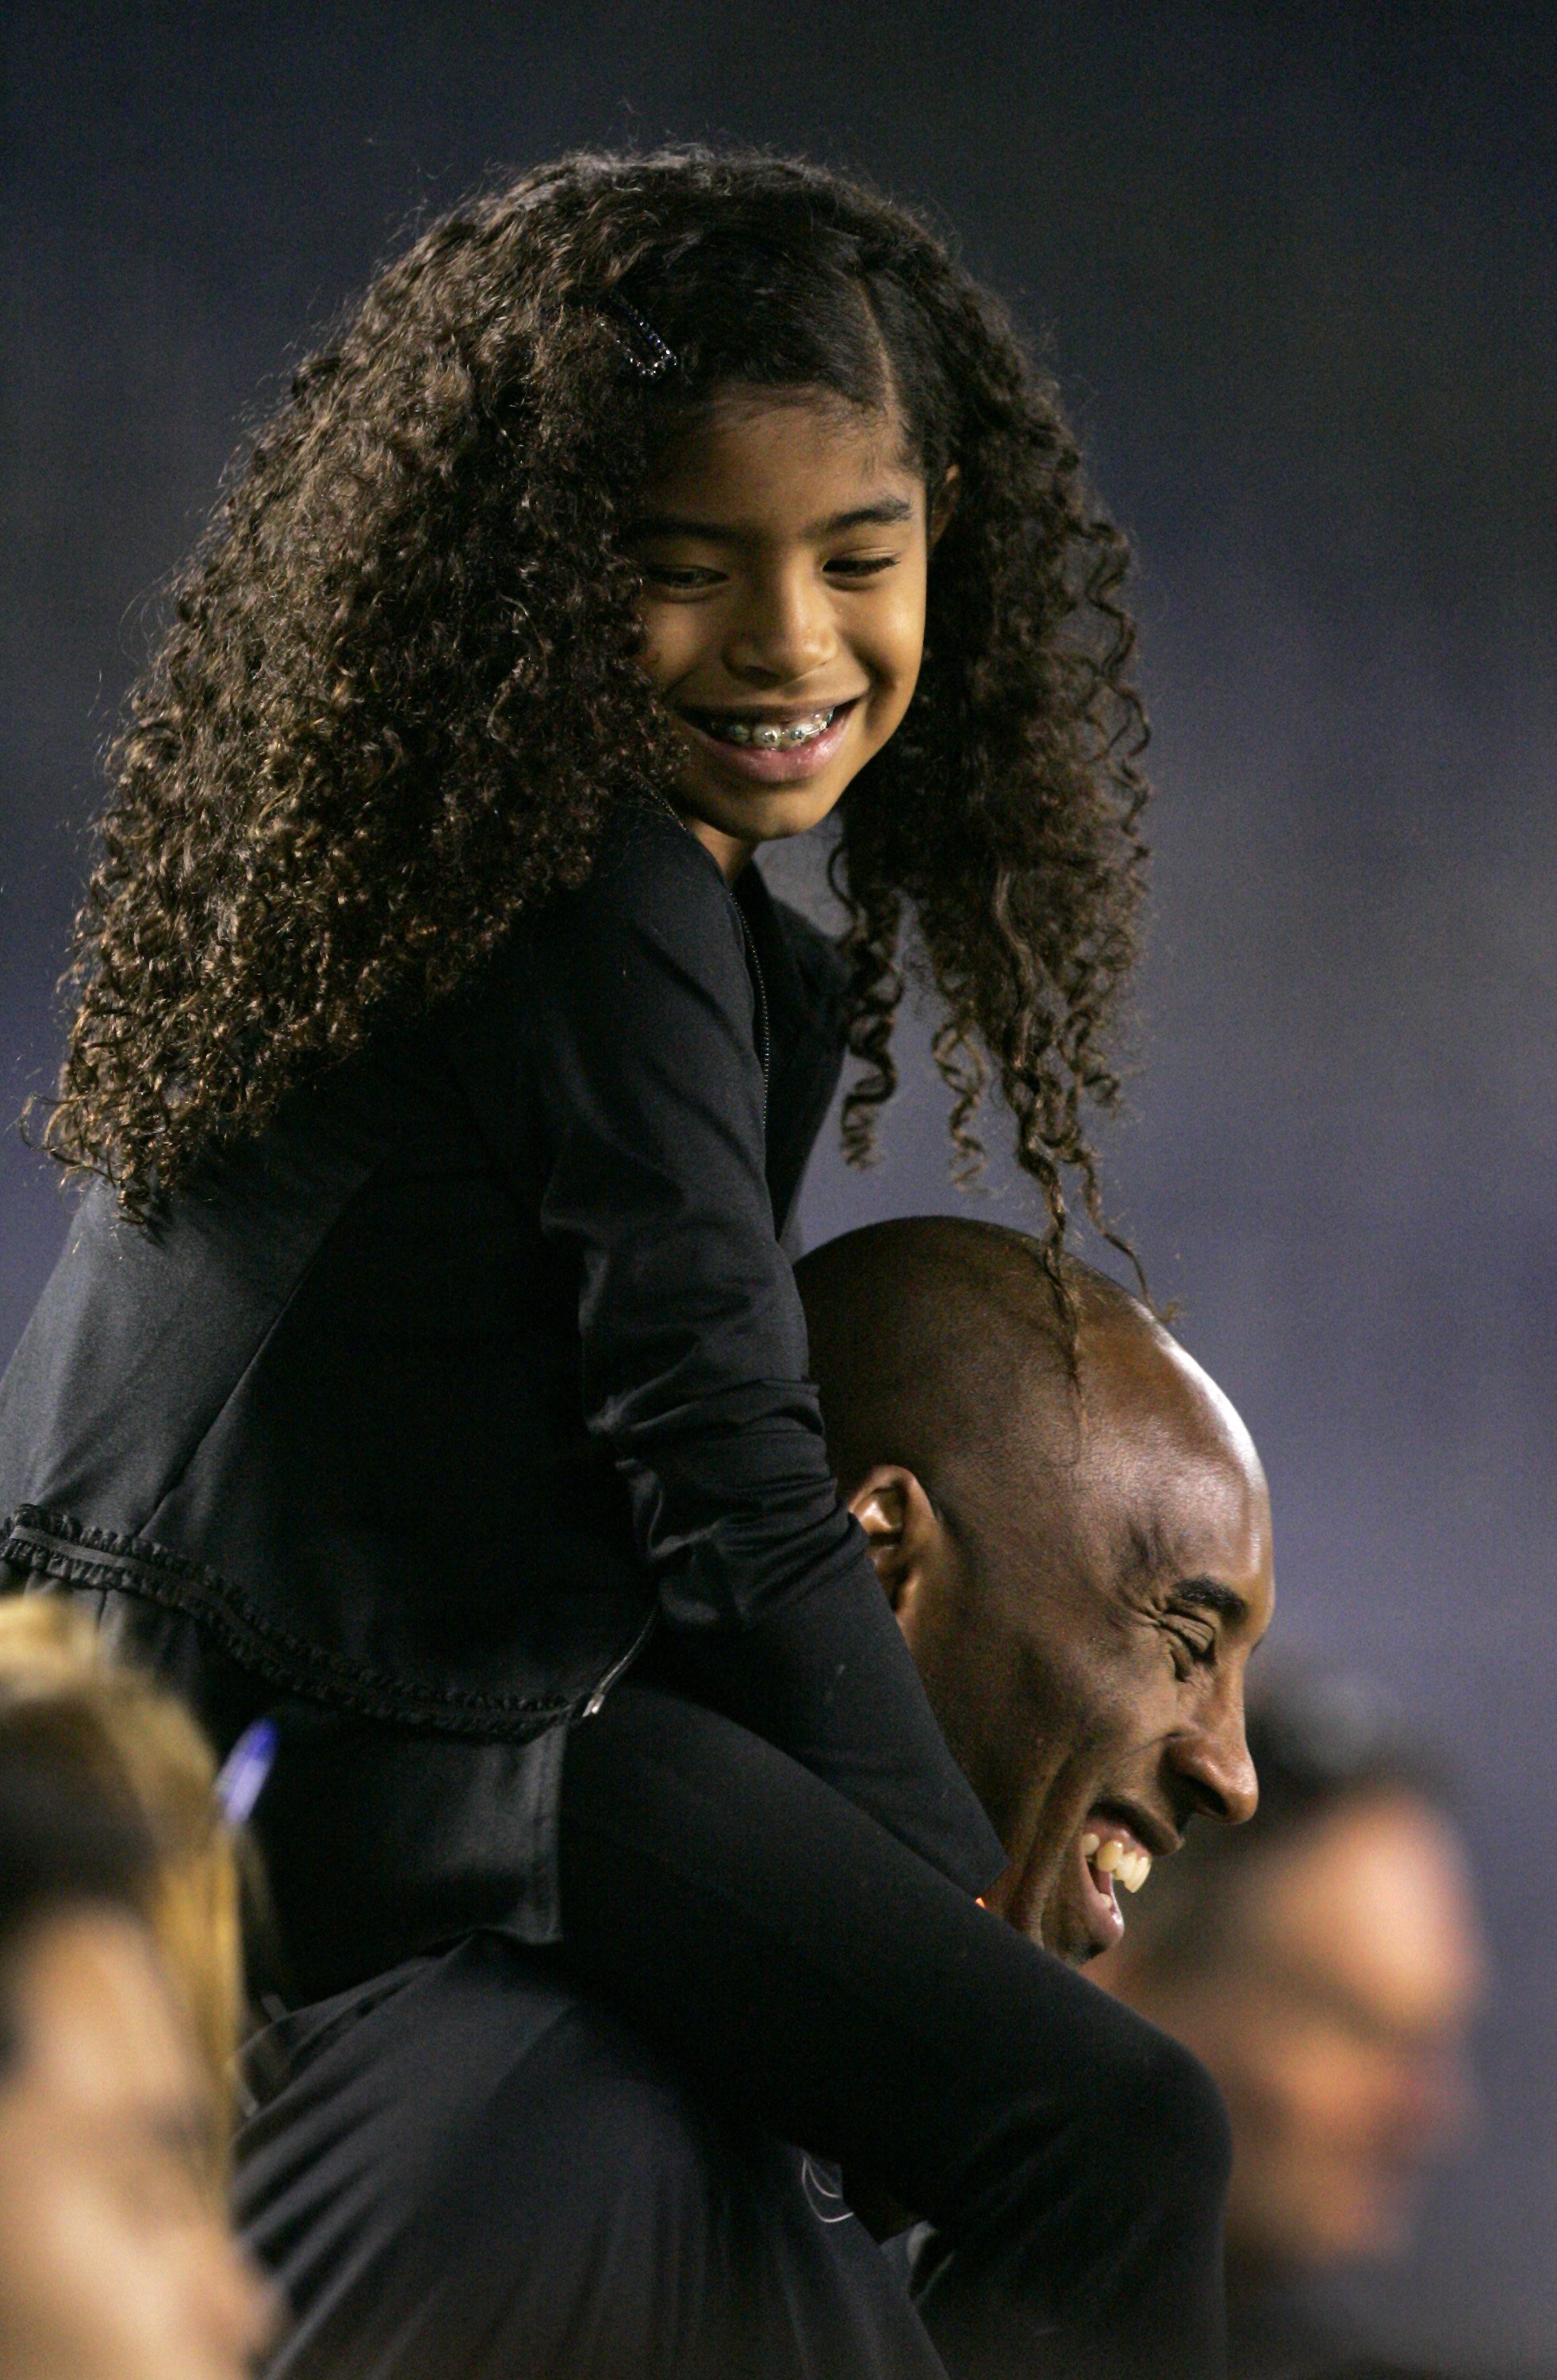 Kobe Bryant with his daughter Gianna Maria-Onore Bryant at the game against the United States and China during an international firendly match  on April 10, 2014, in San Diego, California. | Source: Getty Images.